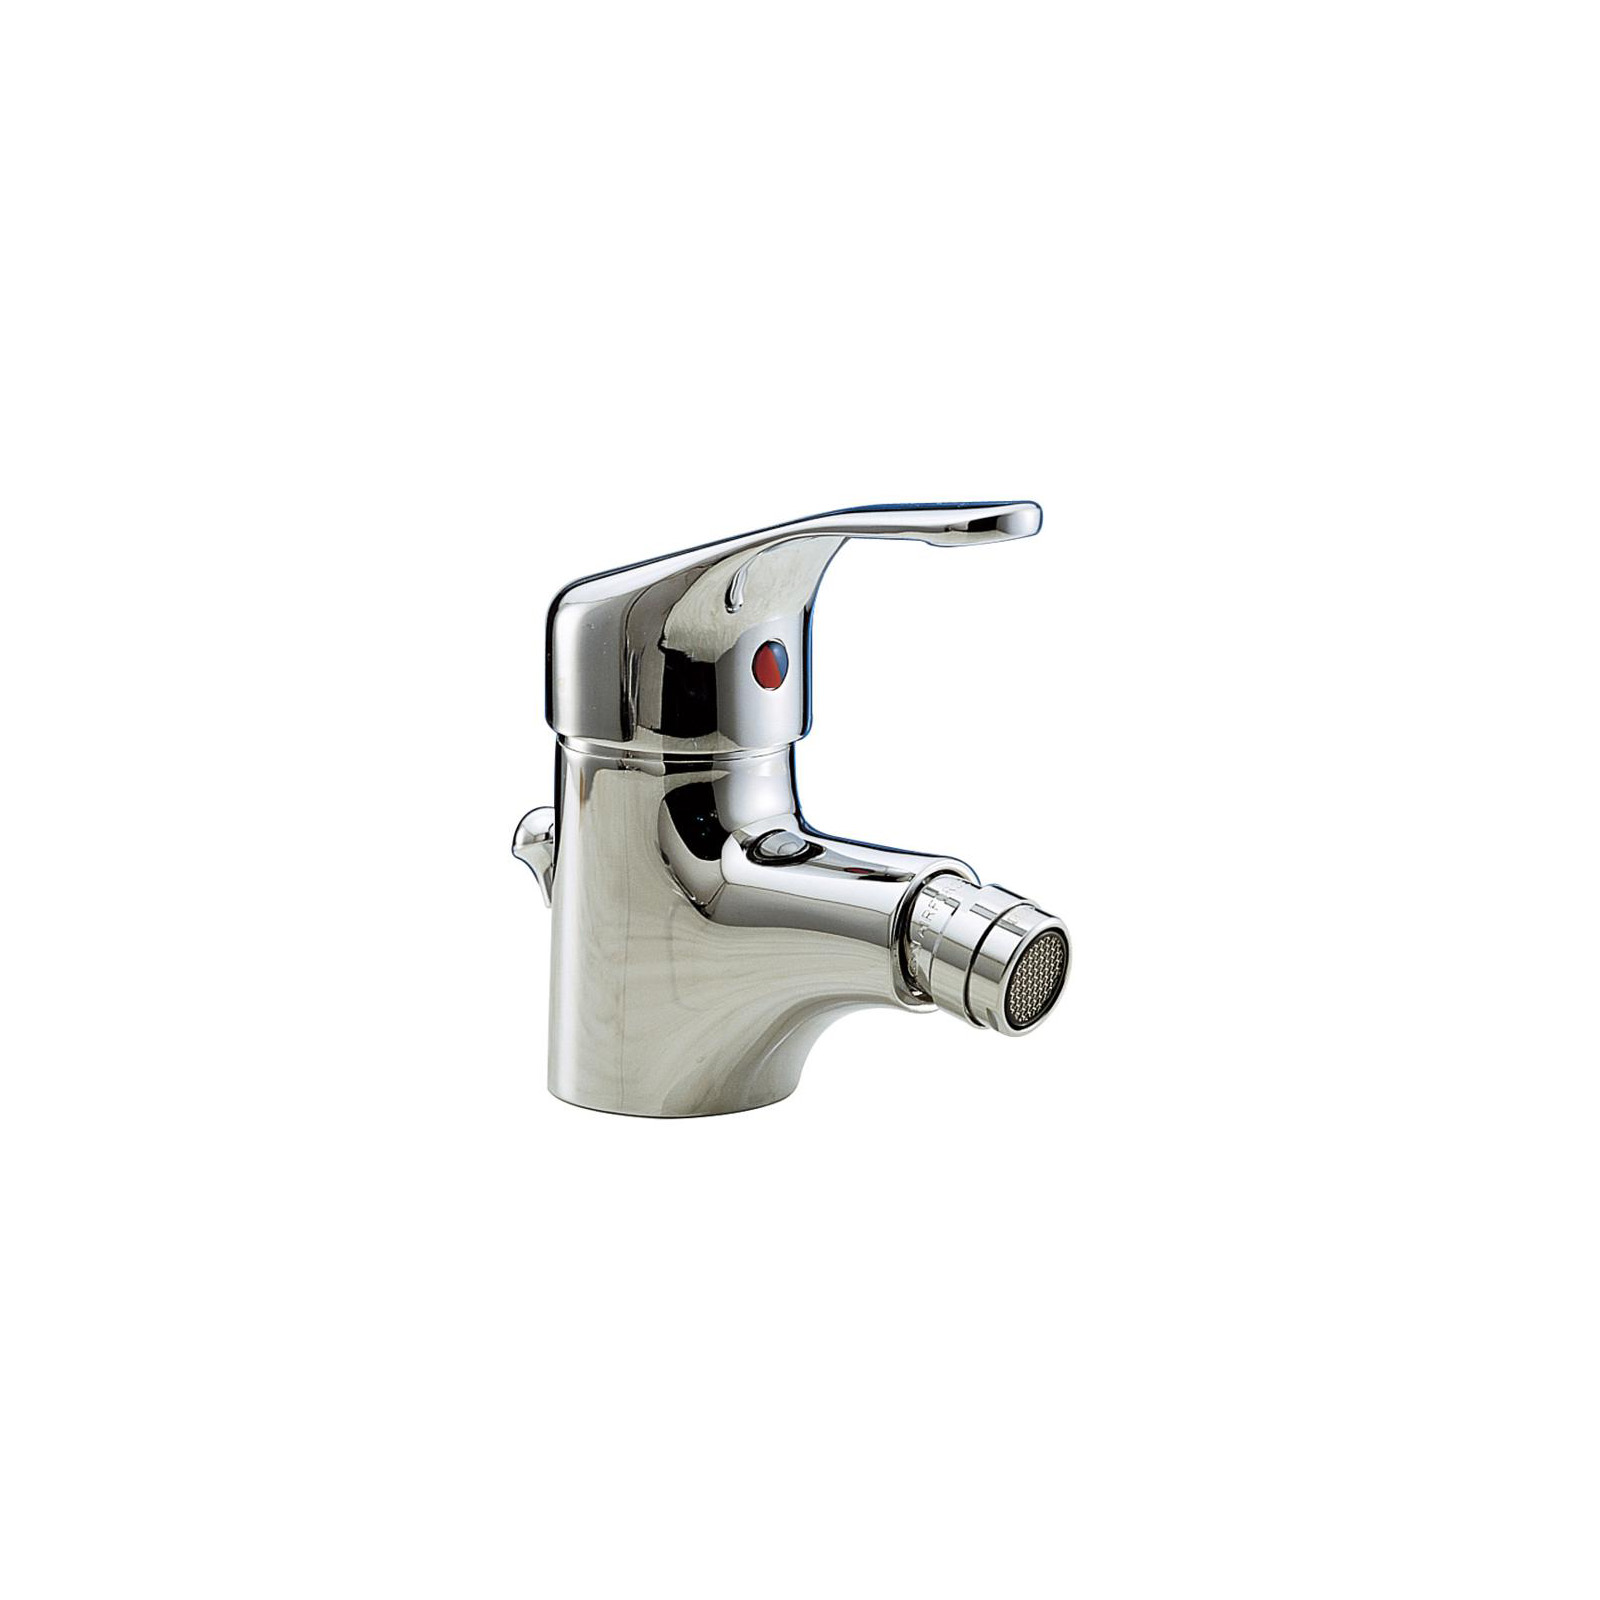 Bidet faucet with chain holder